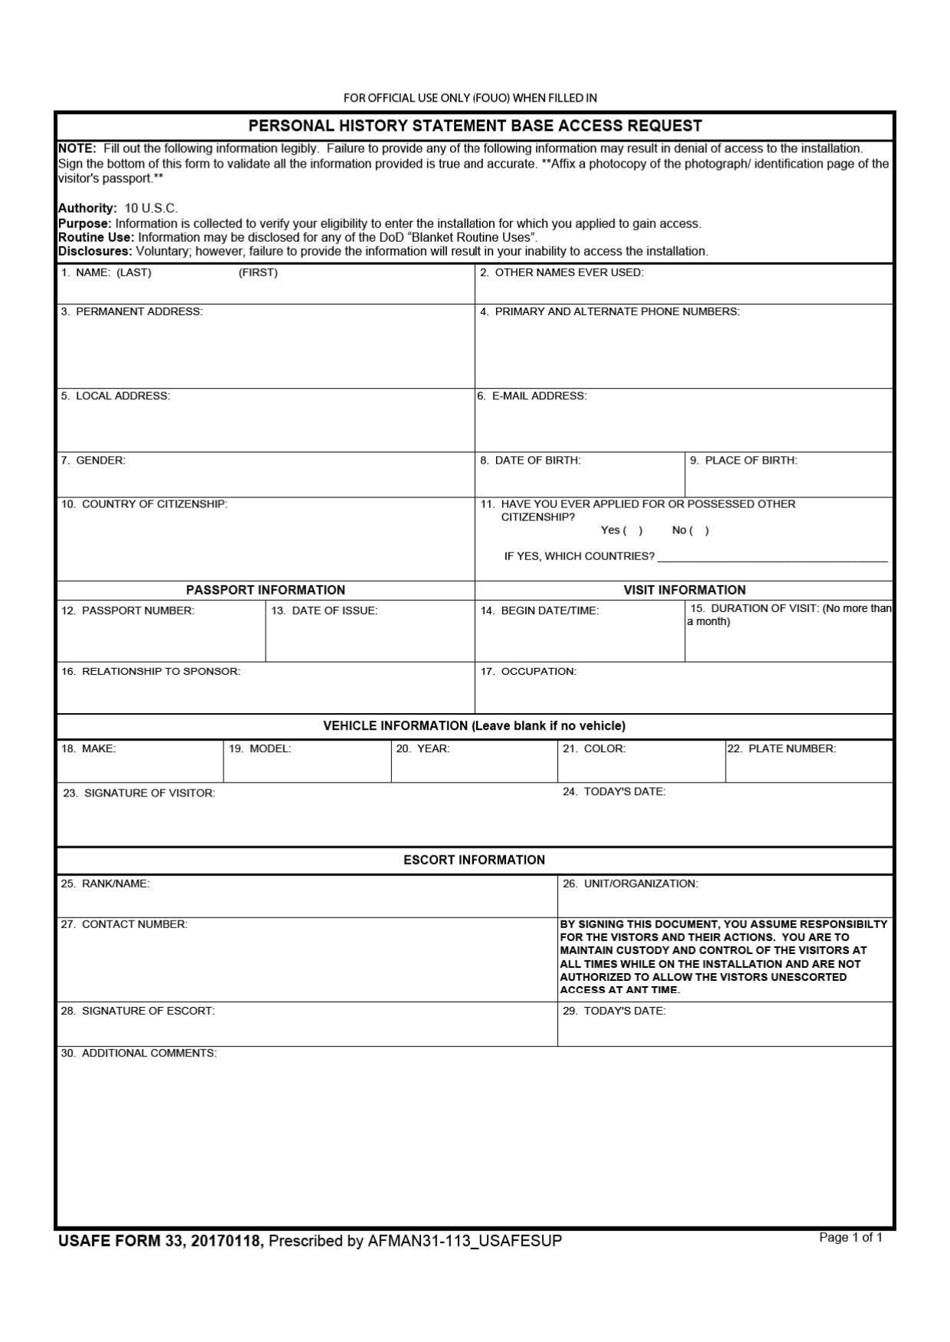 USAFE Form 33 Personal History Statement Base Access Request, Page 1